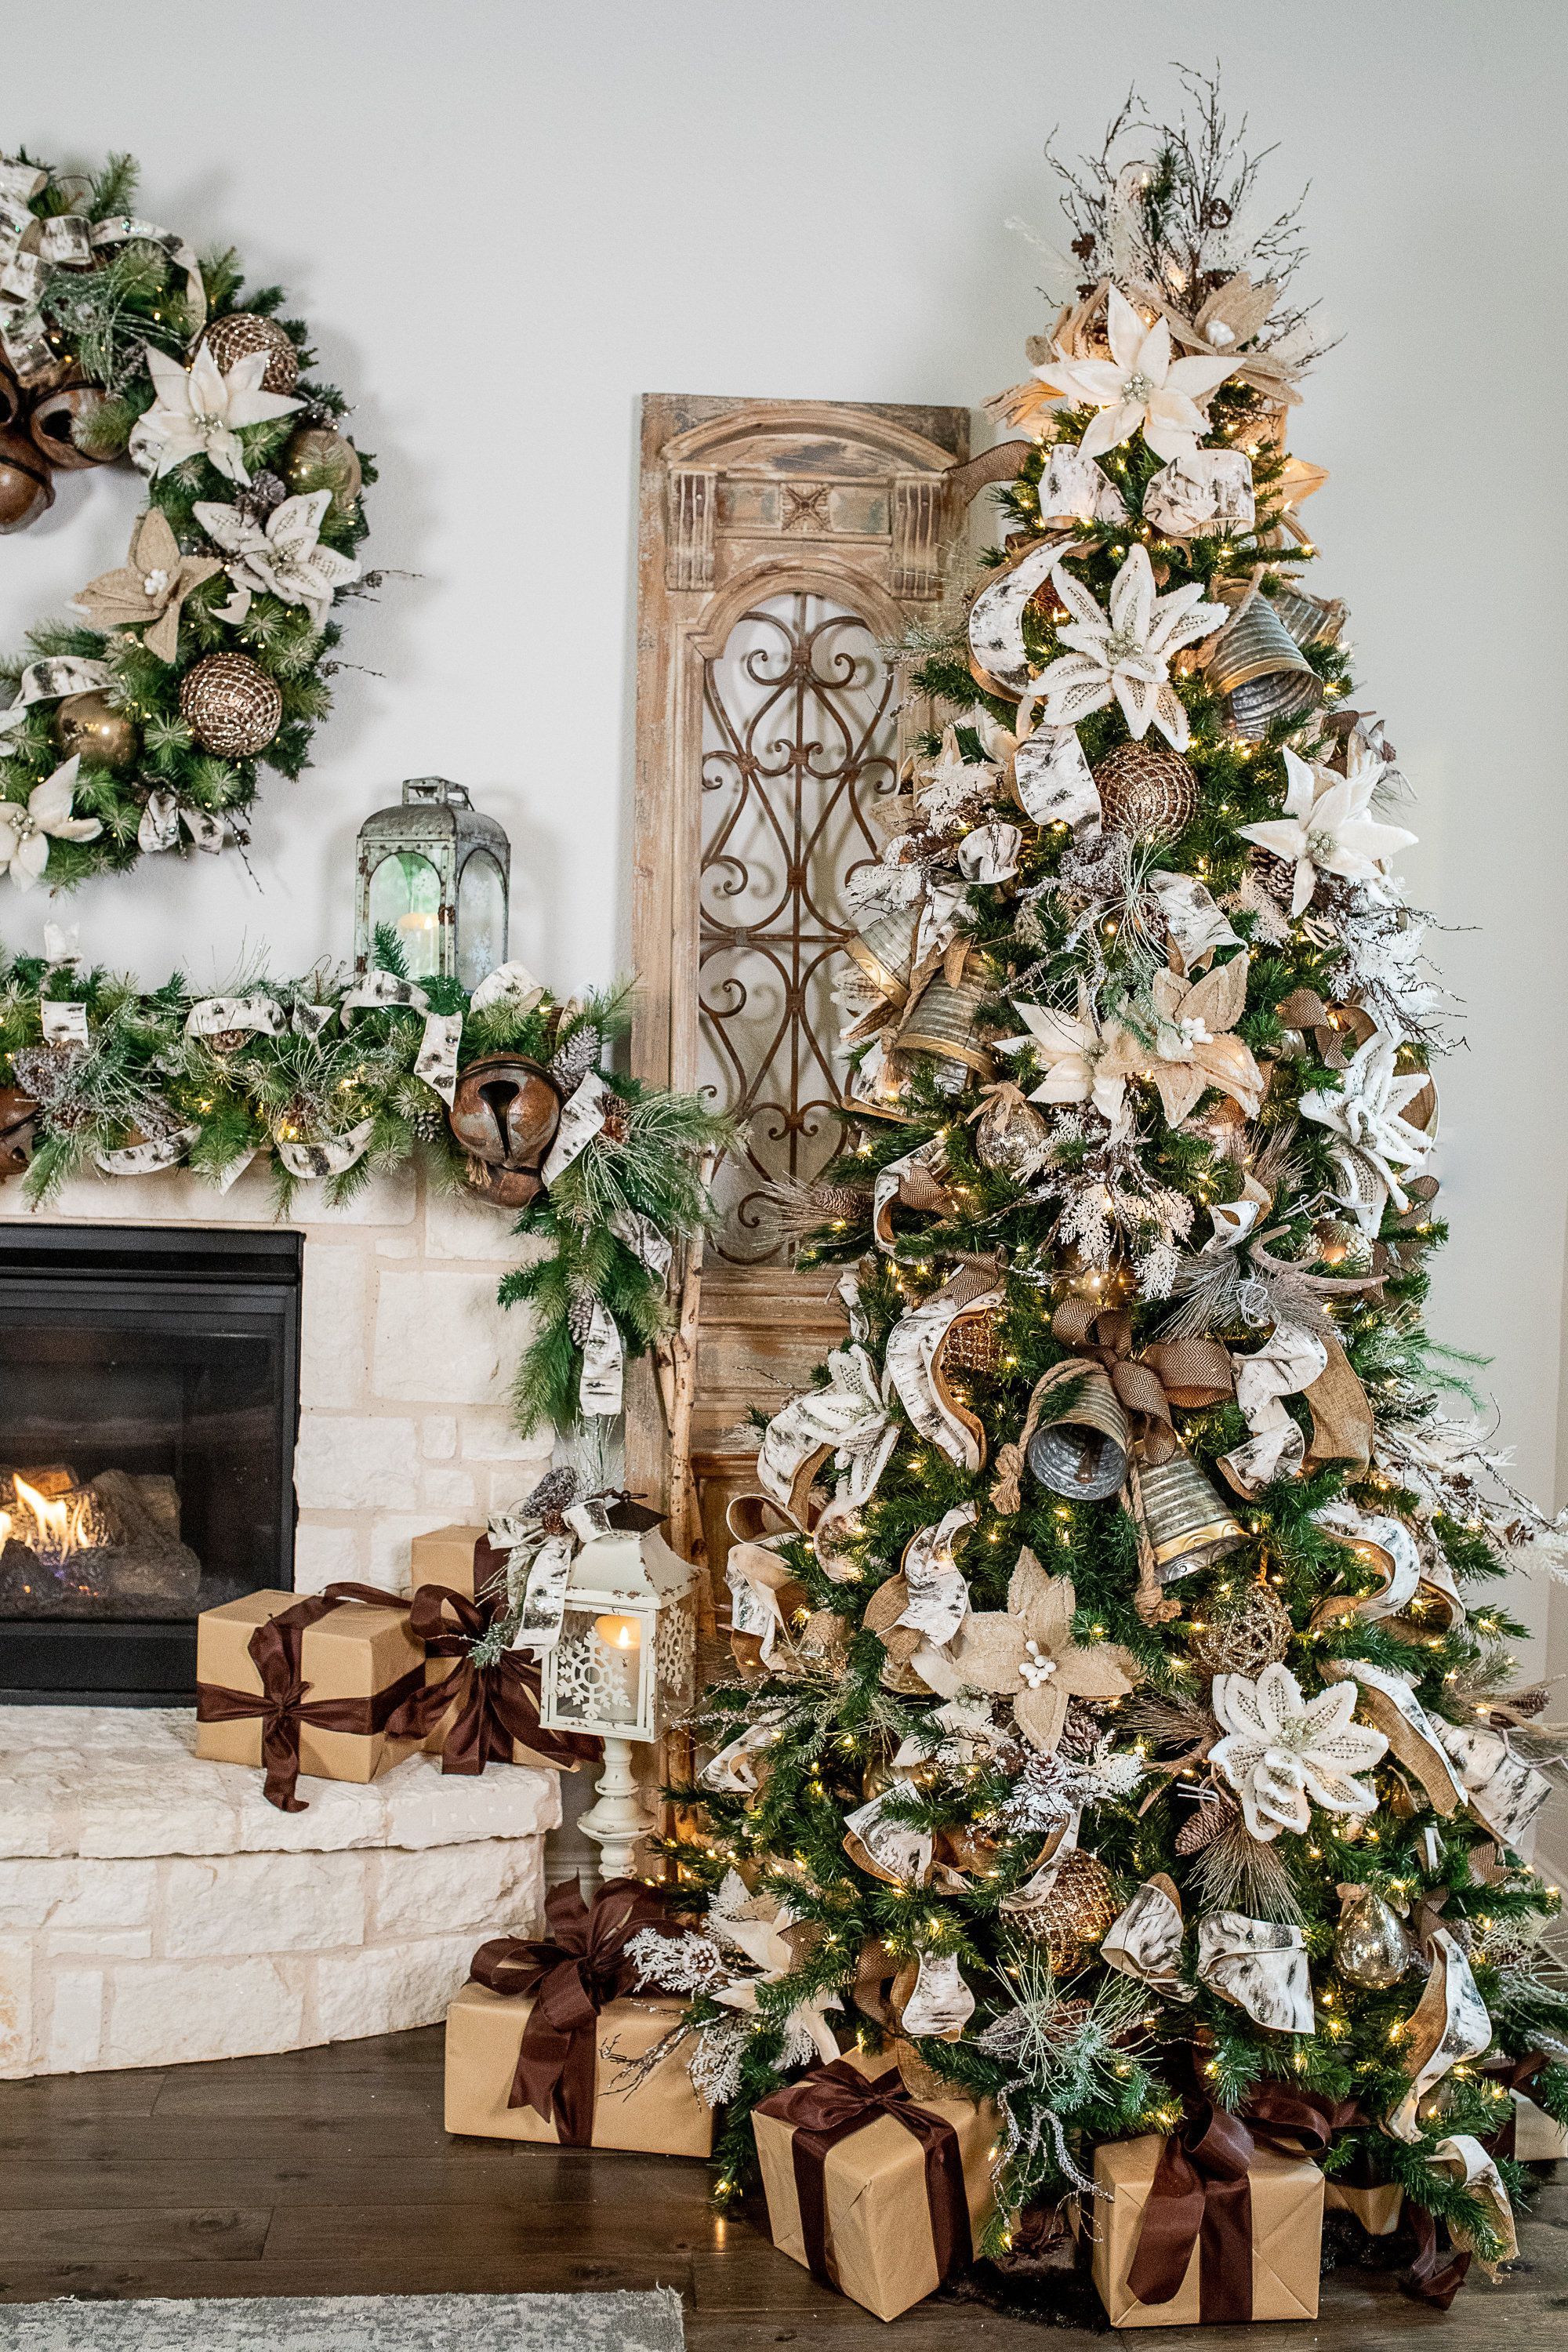 Top Trends in Christmas Home Decor for 2020 -   17 christmas tree decorations ideas